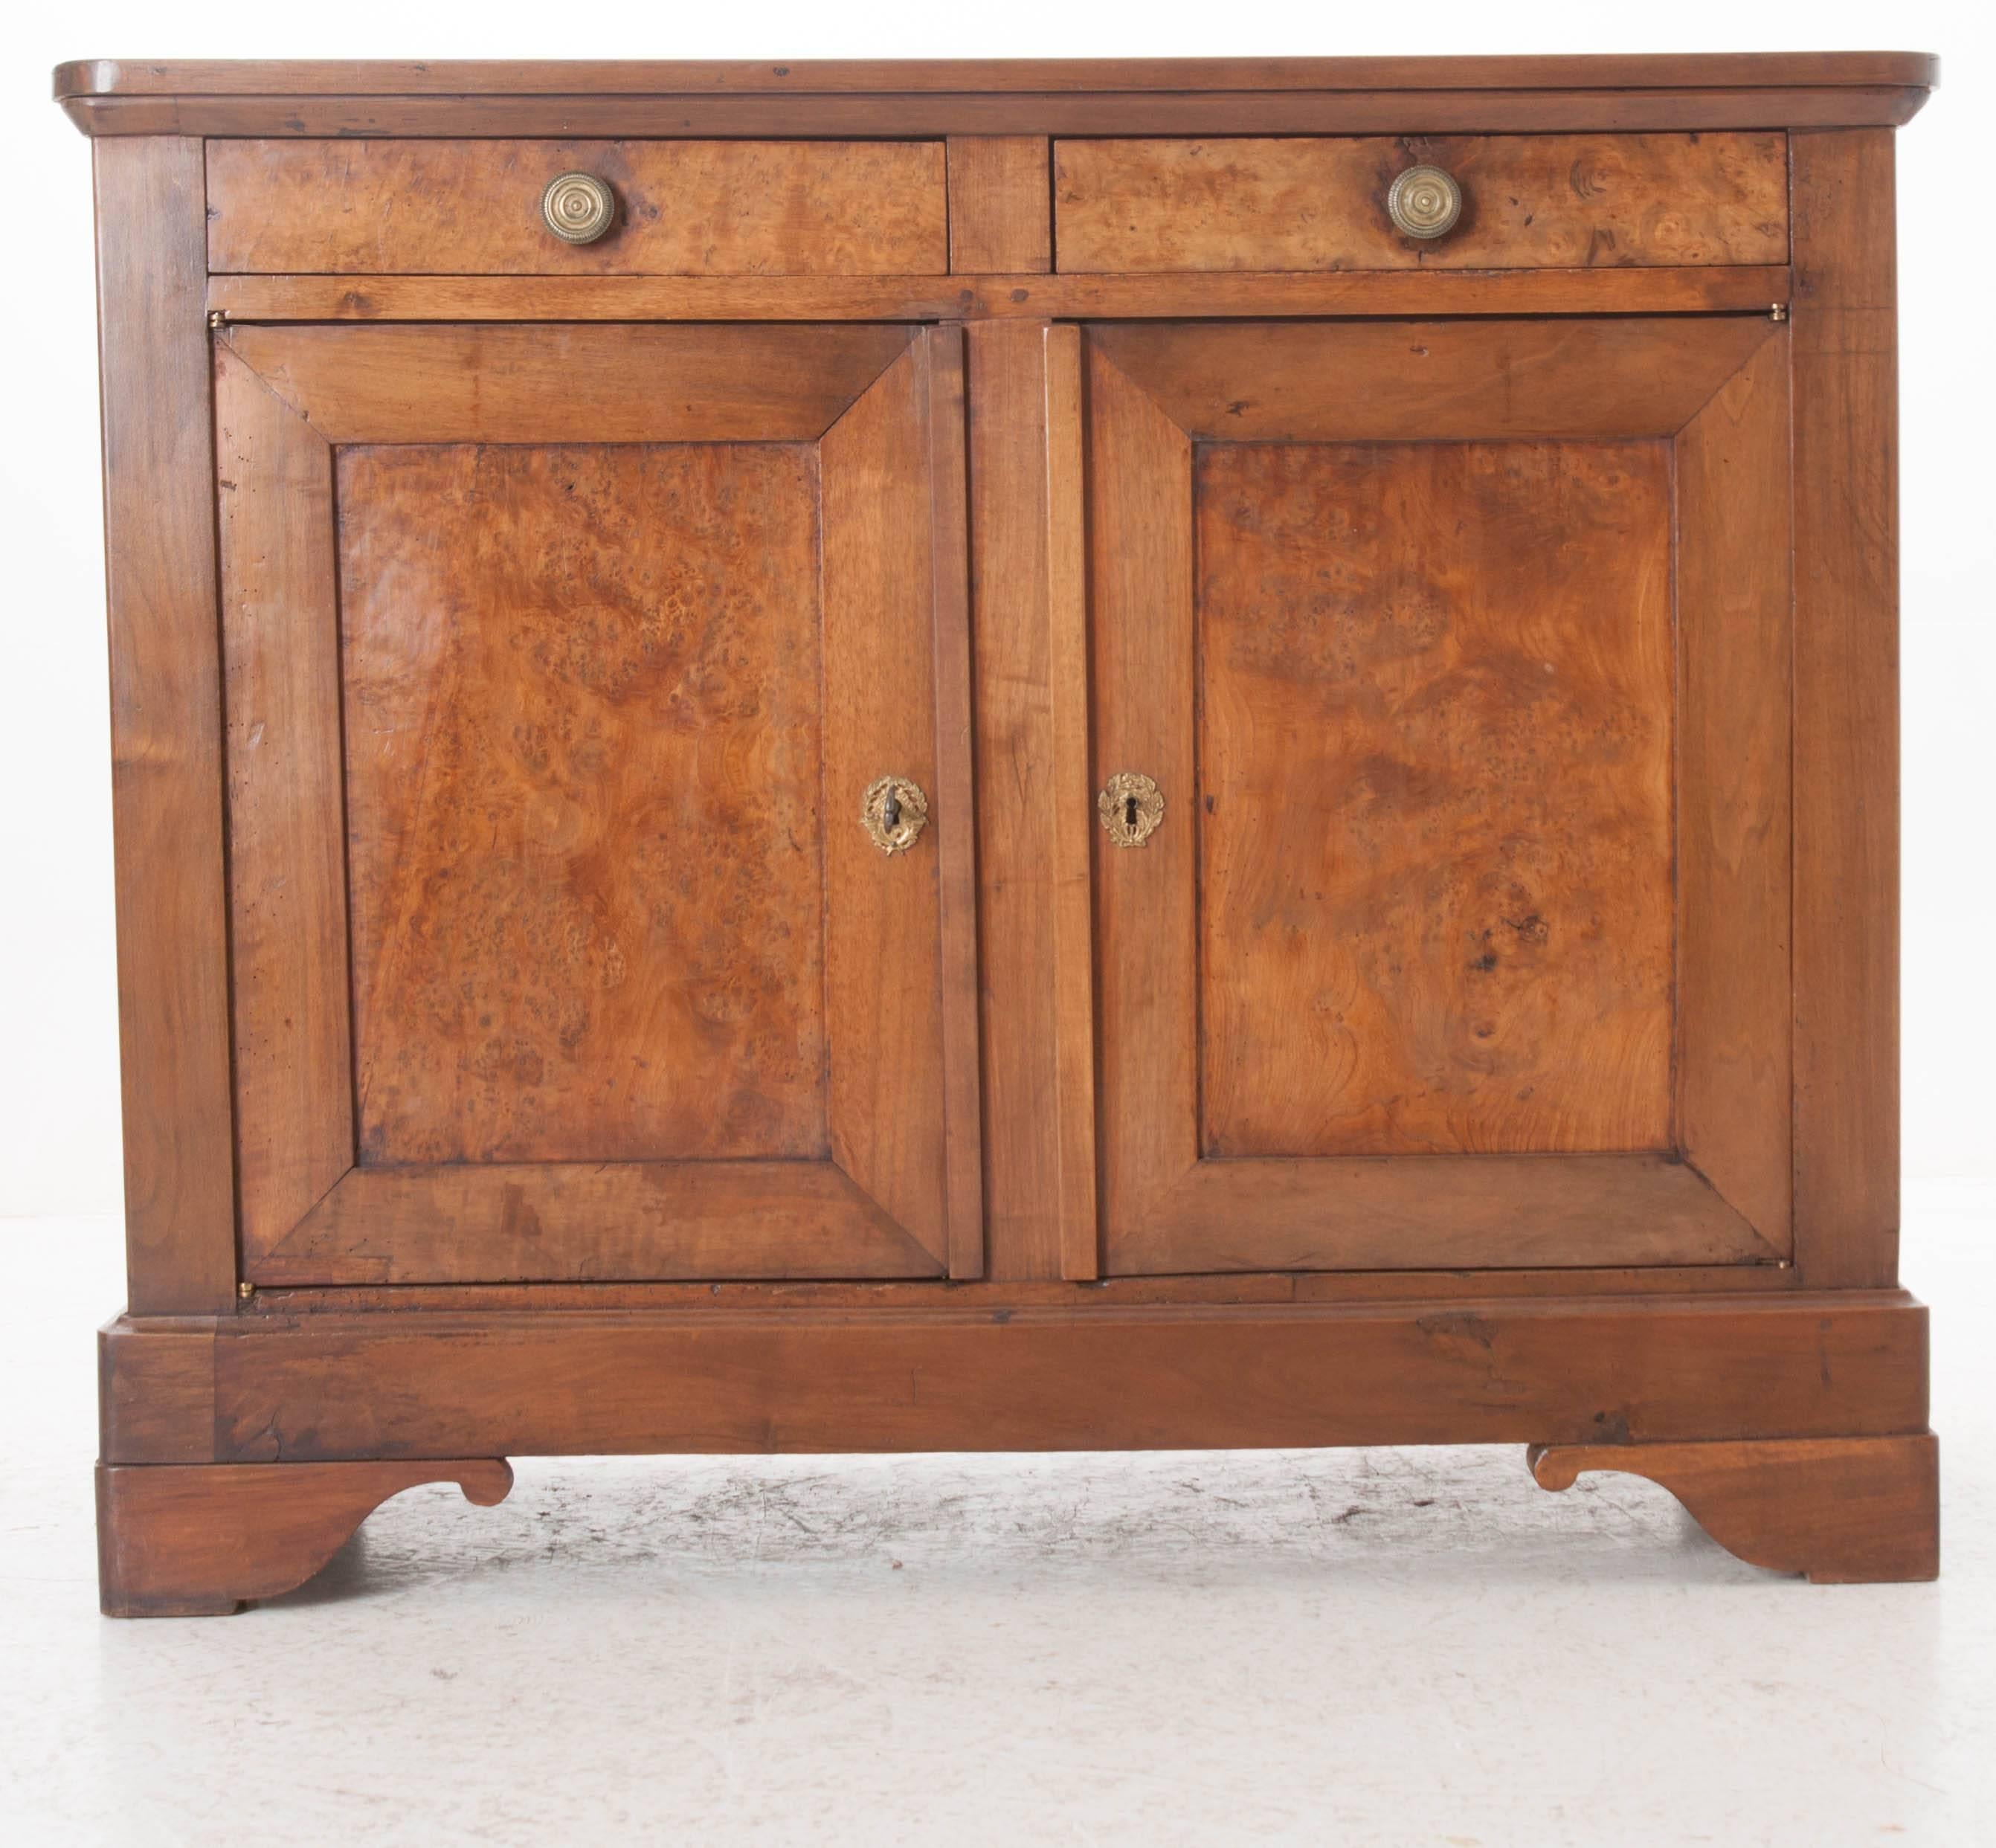 A stunning pair of walnut Louis Philippe buffets from 19th century France. Crafted from solid walnut, each buffet is outfitted with two drawers set above two doors that feature handsome solid burl walnut facades. The drawers have round, decorative